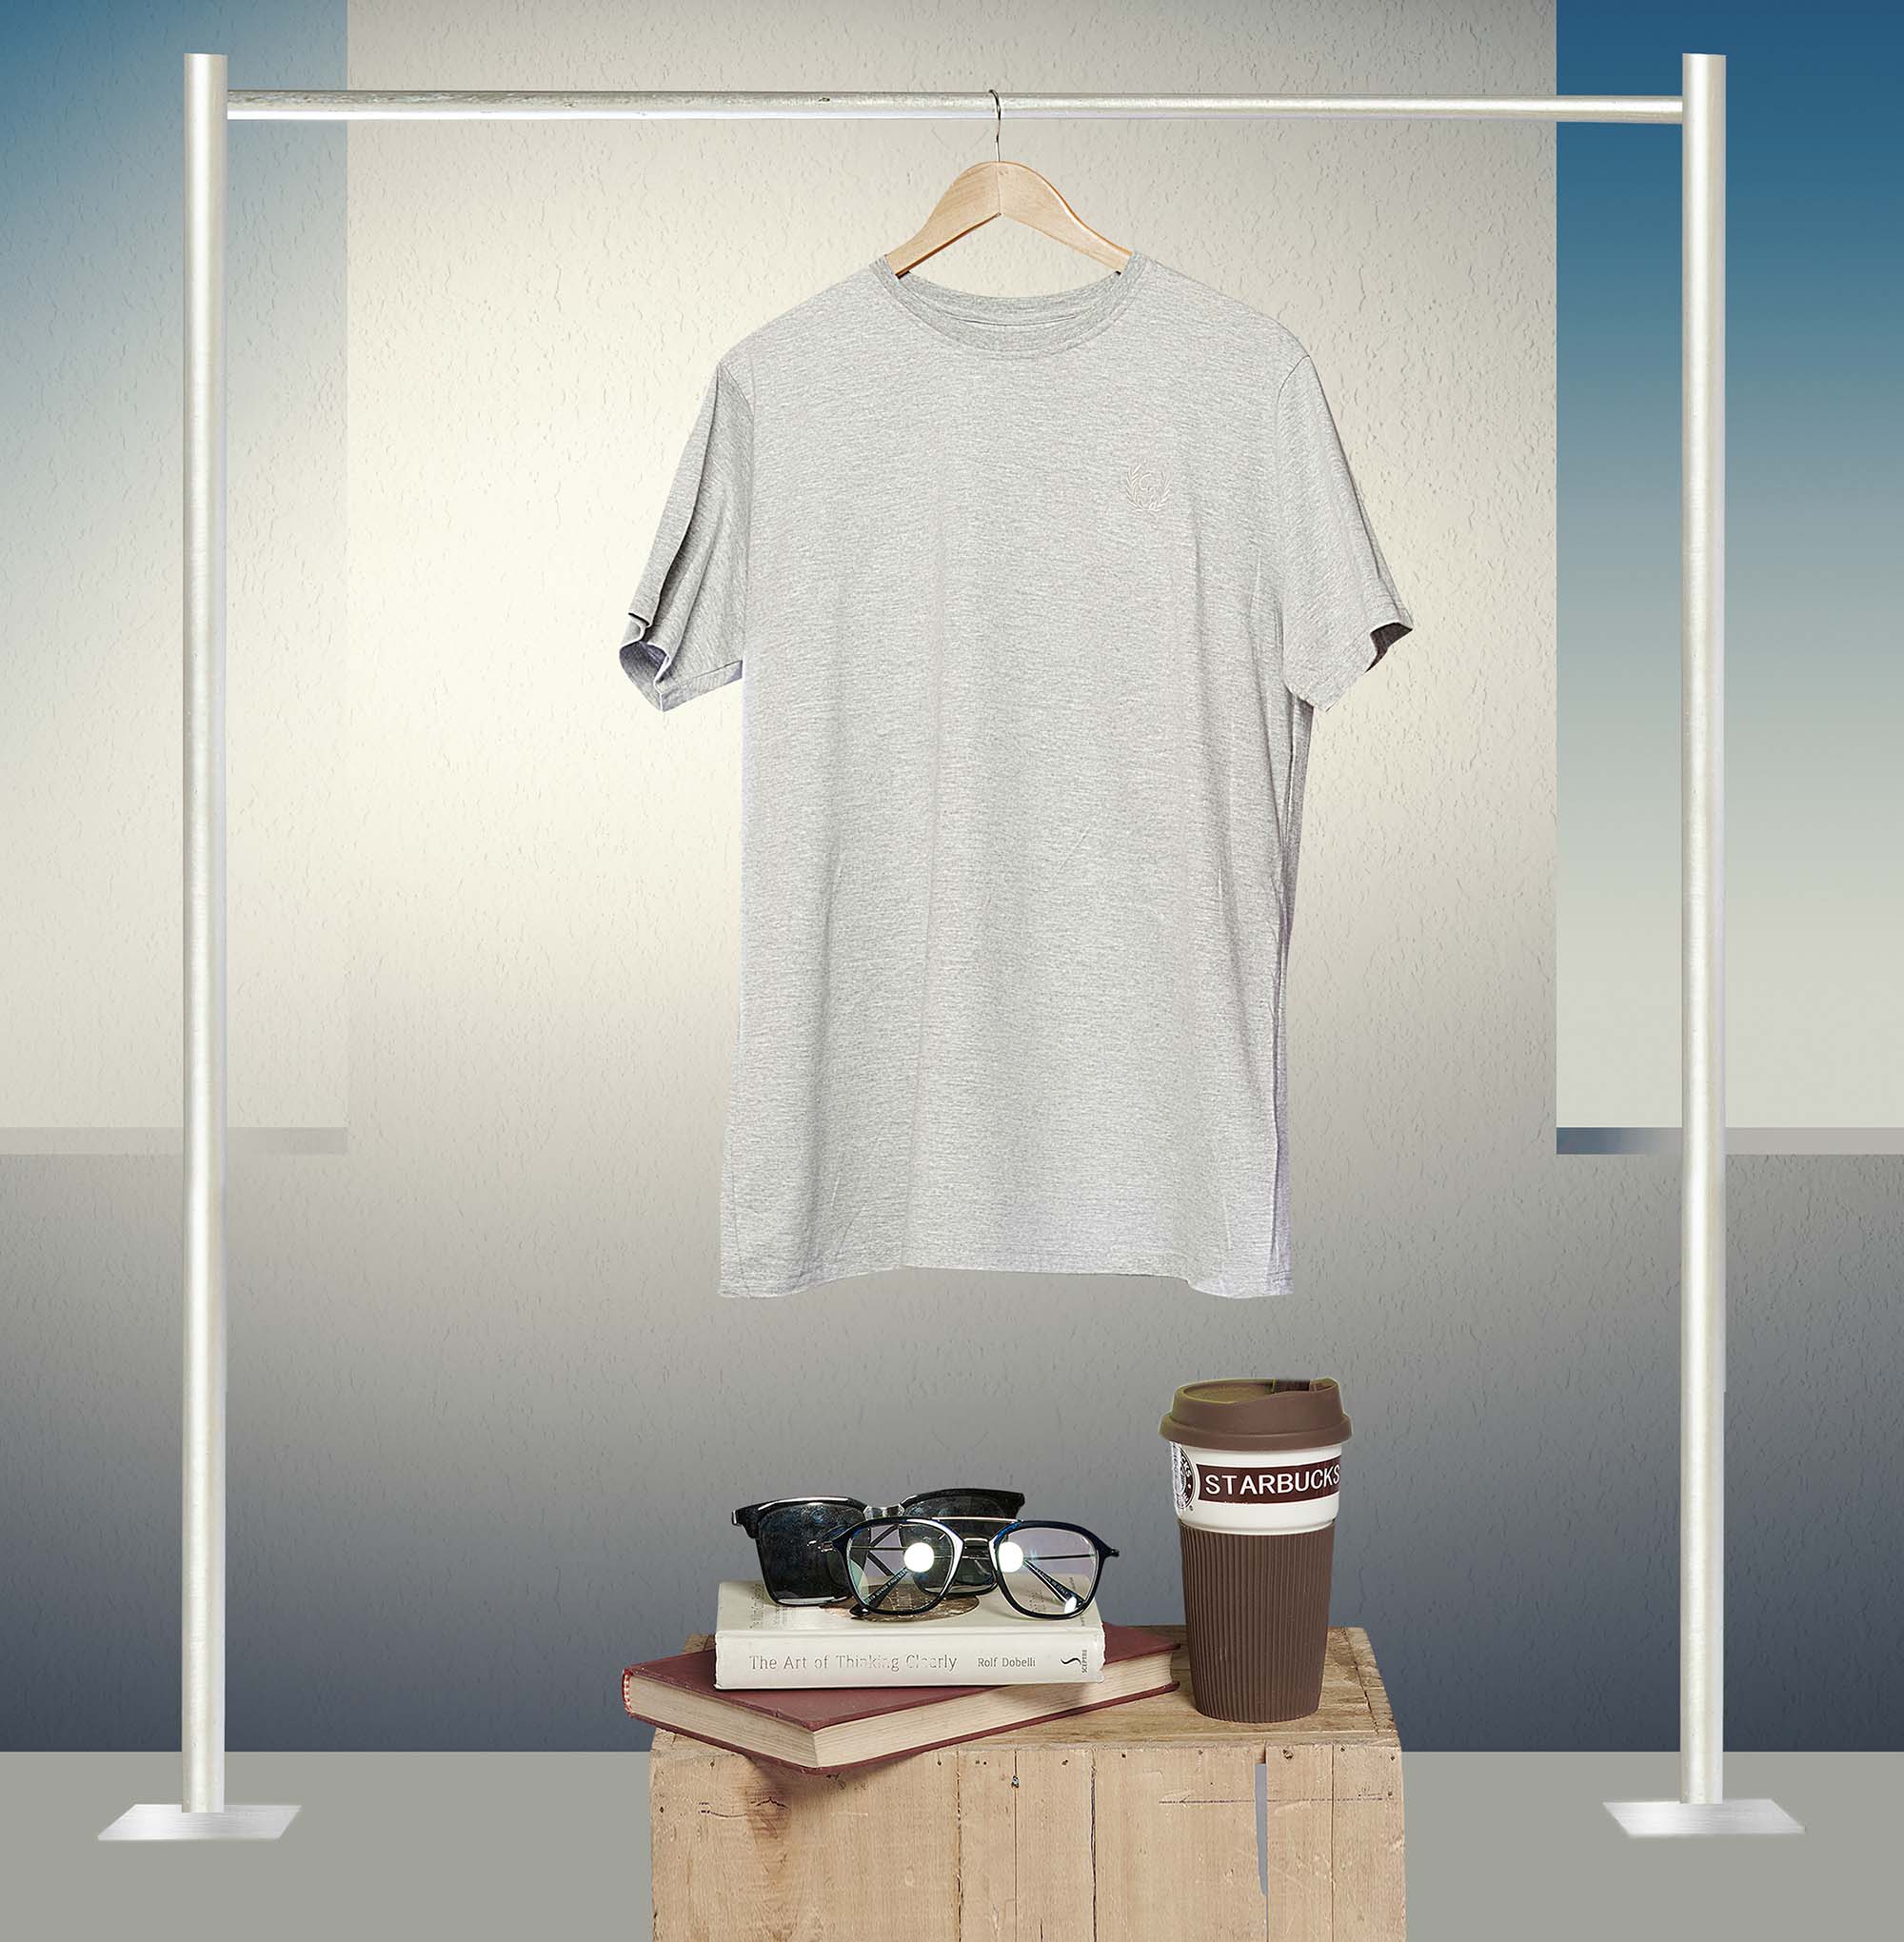 Download Hanging T-Shirt Mockup (PSD) by Dolphin Ad World